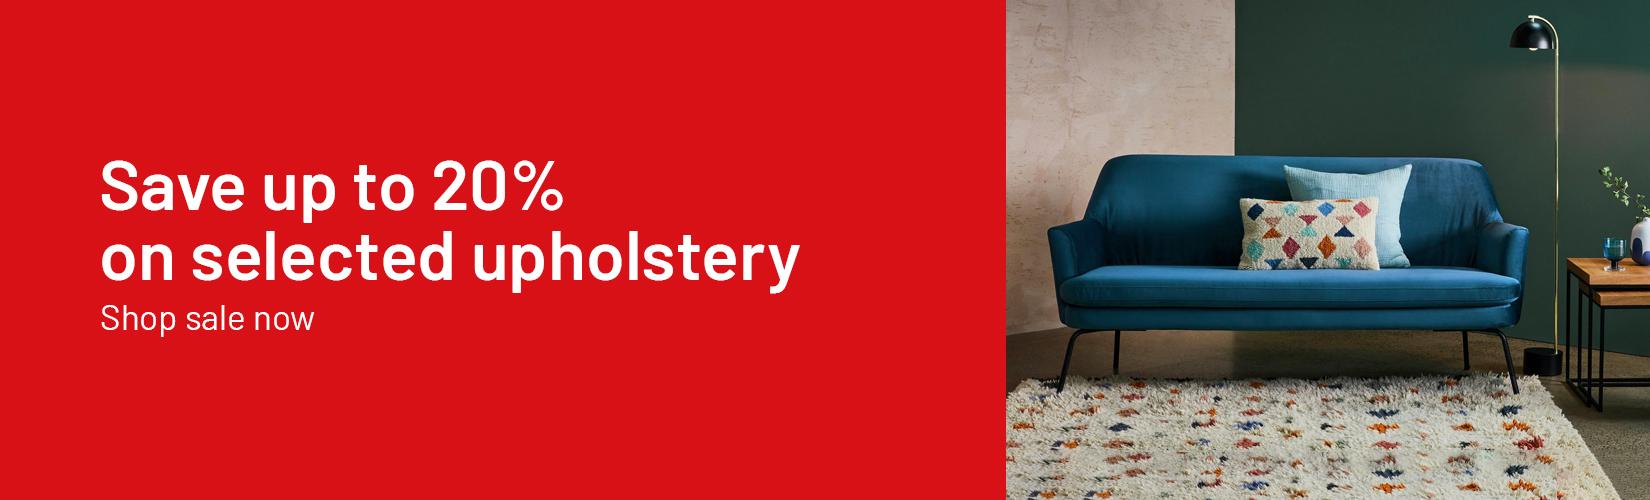 Save up to 20% on selected upholstery. Shop sale now.